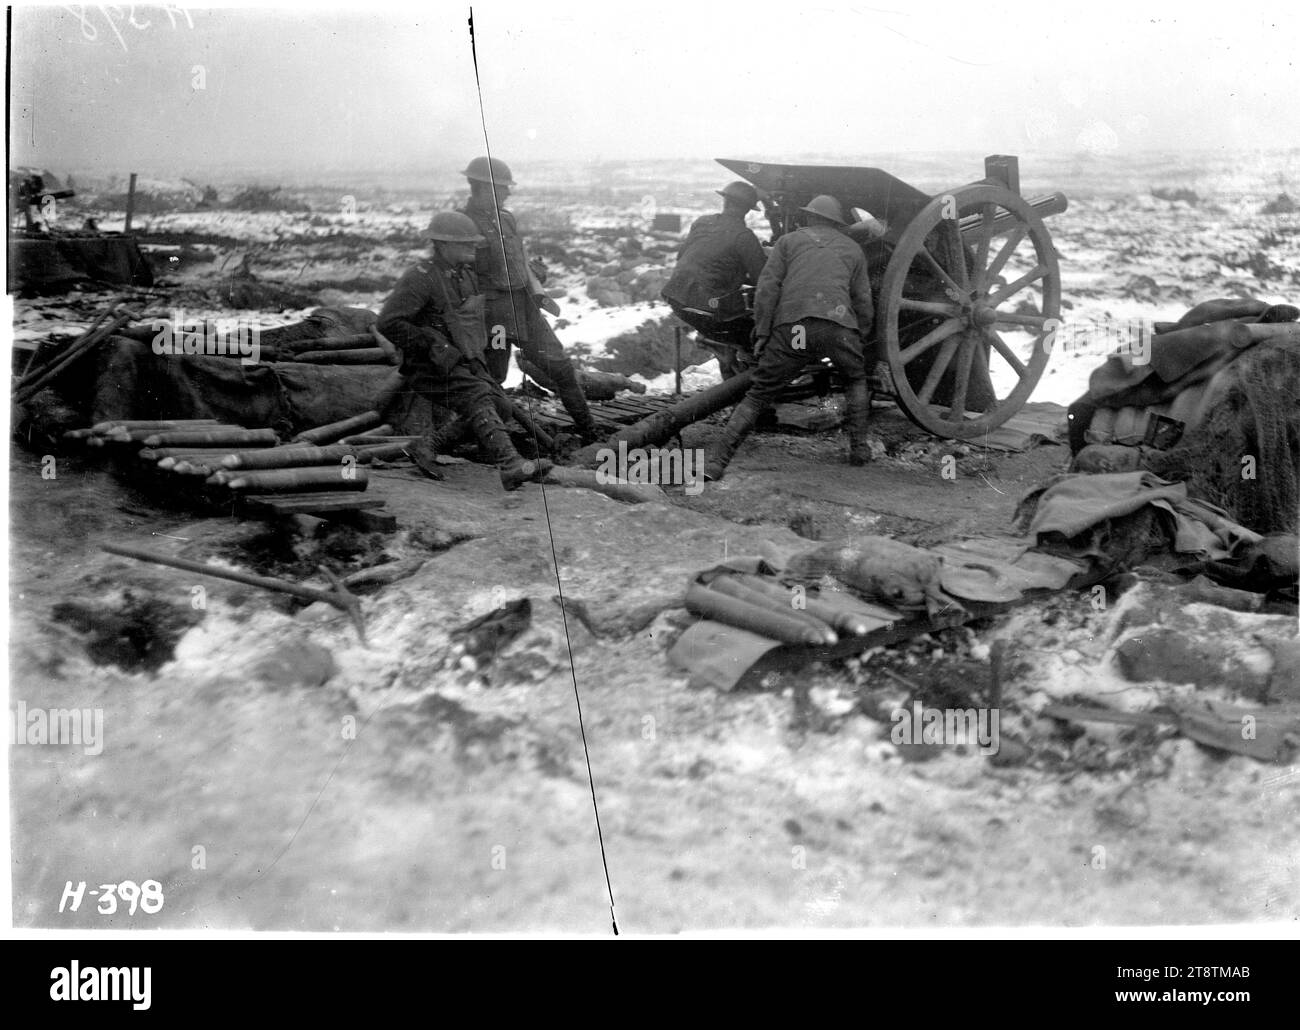 New Zealand artillery in action on the Butte, Belgium, New Zealand artillerymen firing a gun in snowy conditions on the Butte, Belgium, during World War I. View from behind the gun showing uncovered shells. Two soldiers are firing the gun and two soldiers are behind it. Photograph taken 1 January 1918 Stock Photo